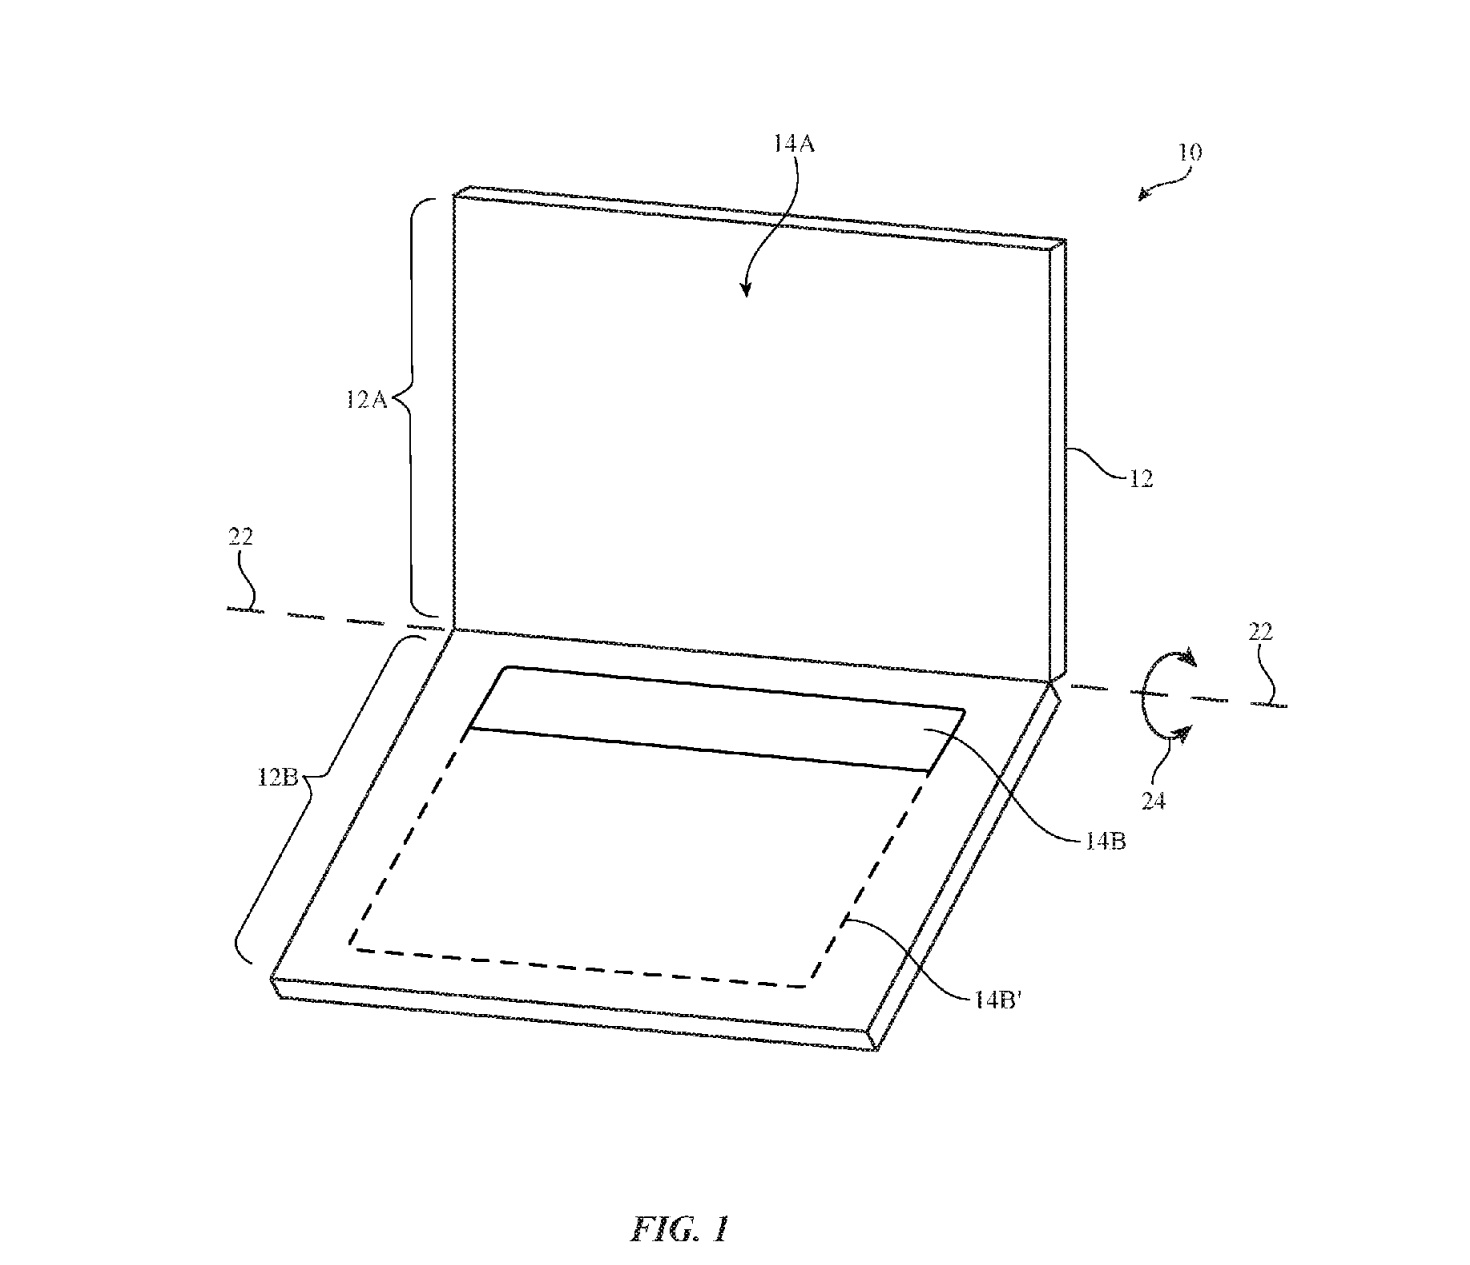 Here is how Apple Macs could look like in the future according to new patent